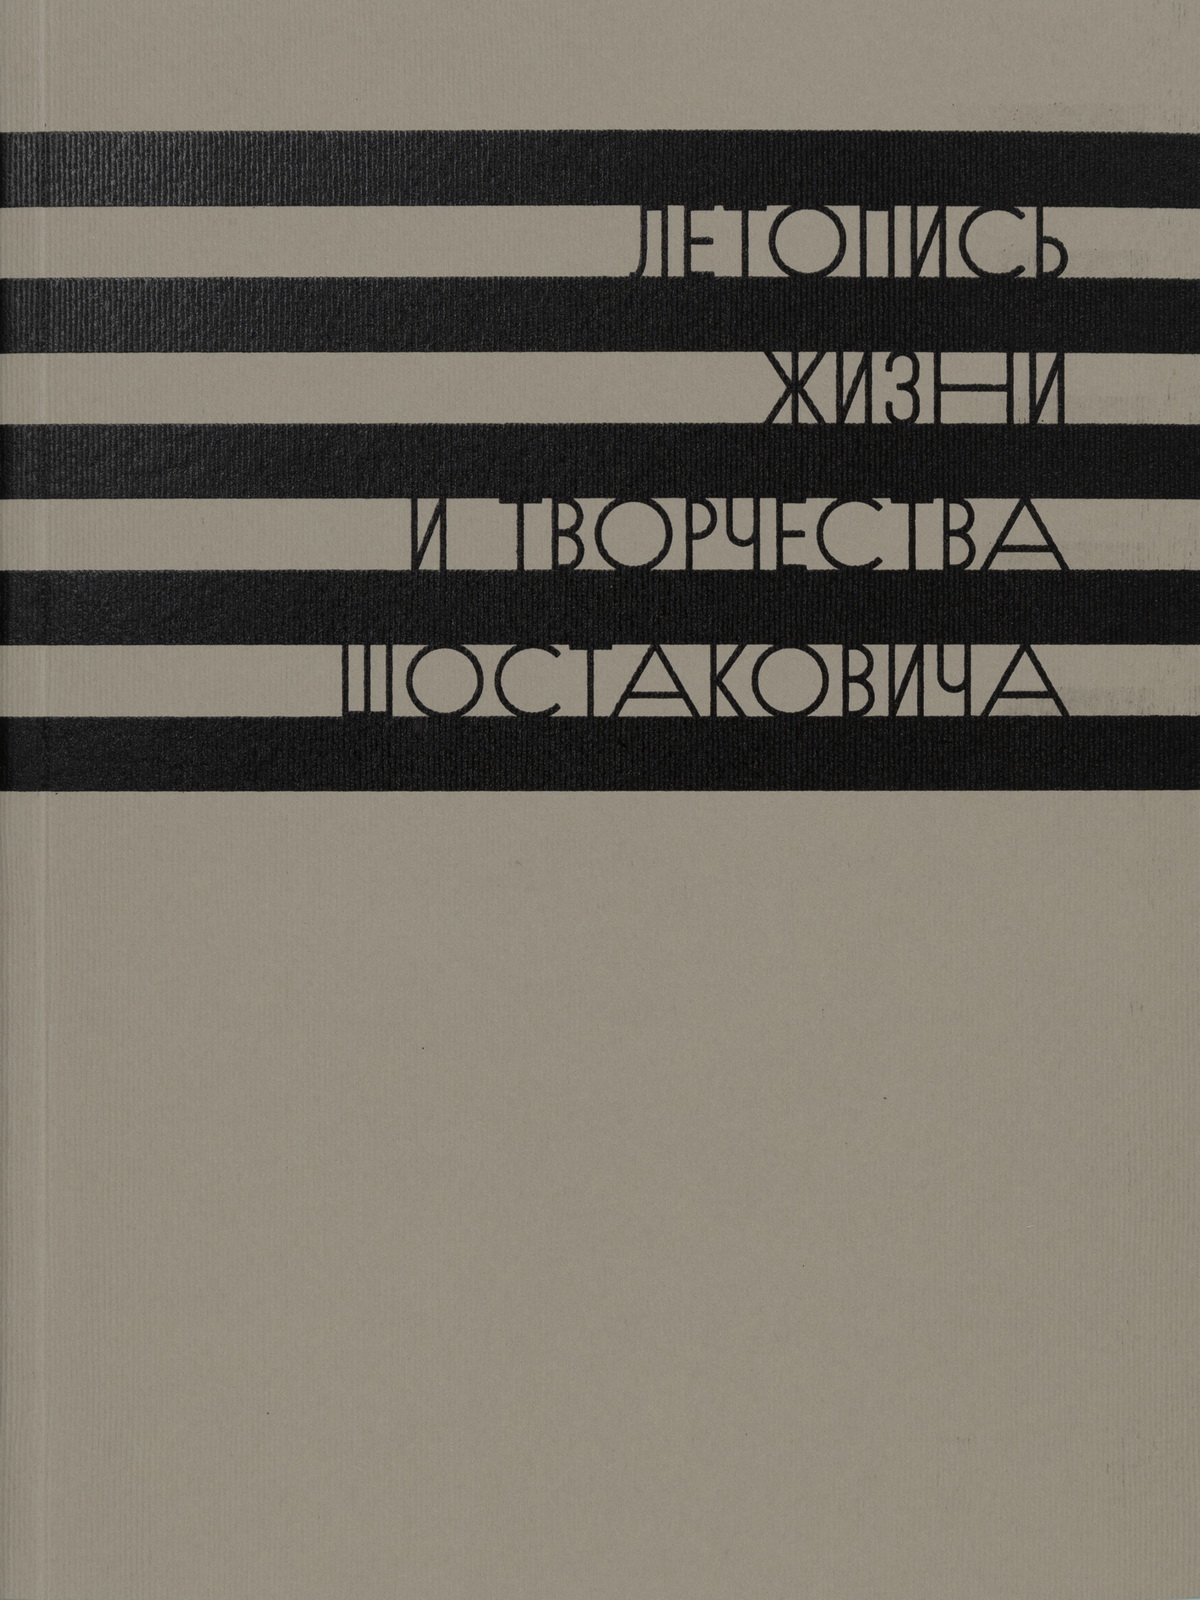 Dmitri Shostakovich: Chronicles of His Life and Work, in 10 vols., Vol. 2 (1931-1935)